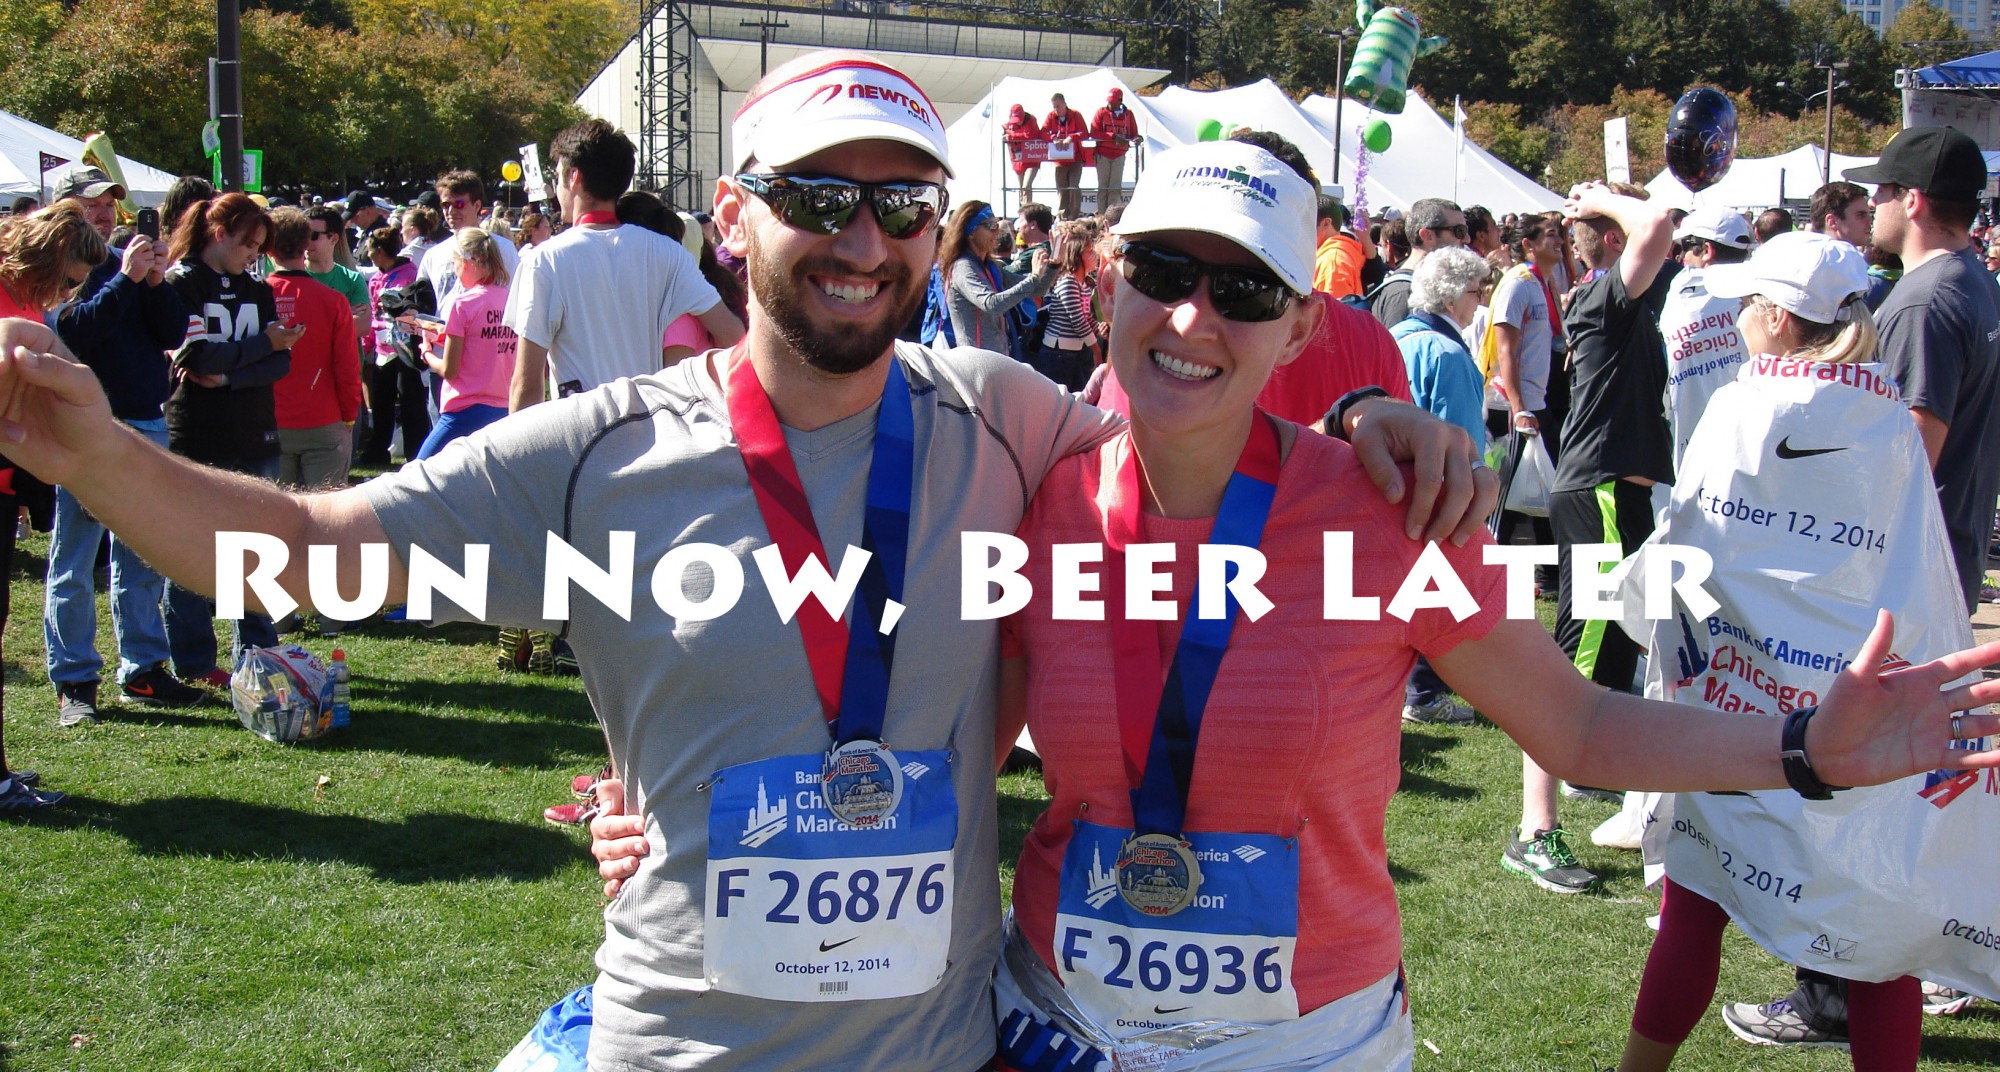 Run Now, Beer Later